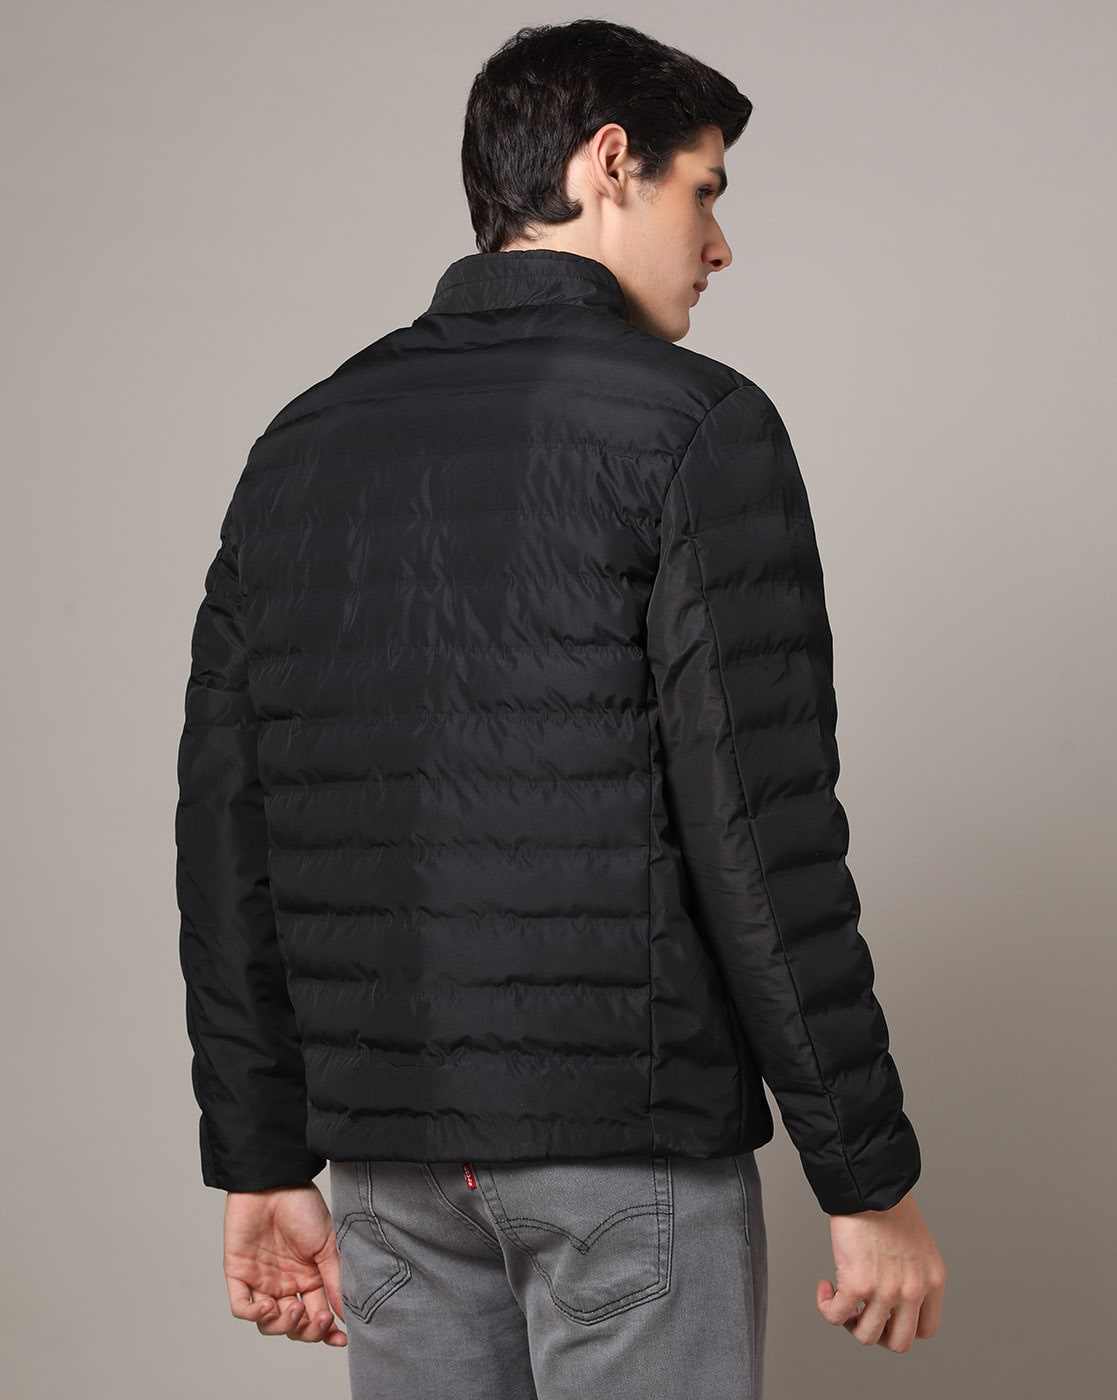 Zip-Front Puffer Jacket with Insert Pockets